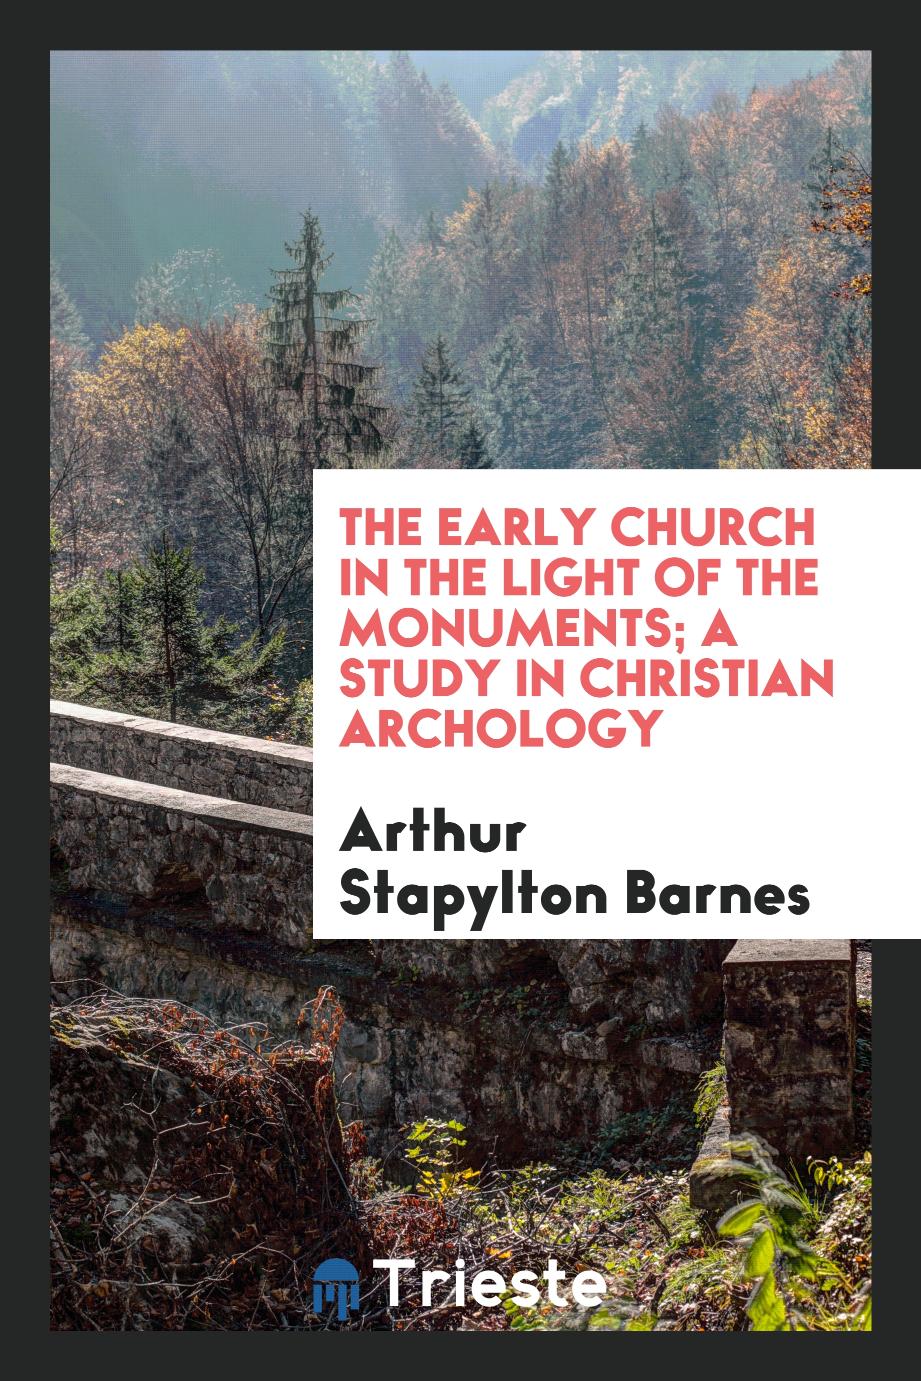 The early church in the light of the monuments; a study in Christian archology